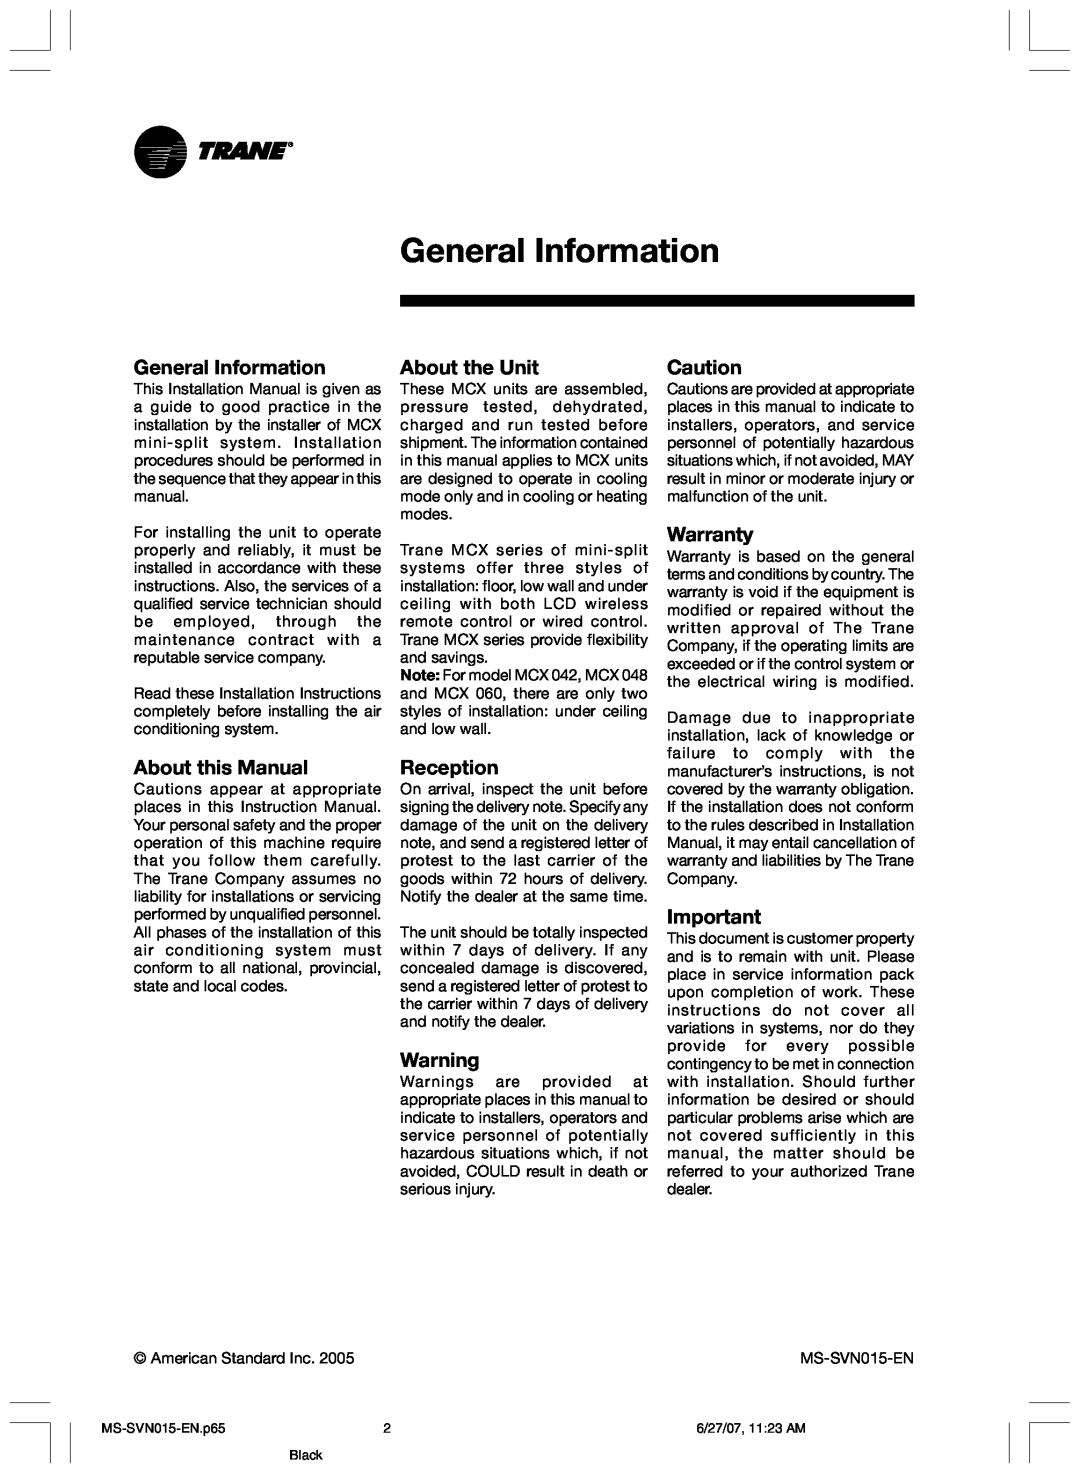 Trane MS-SVN015-EN installation manual General Information, About the Unit, Warranty, About this Manual, Reception 